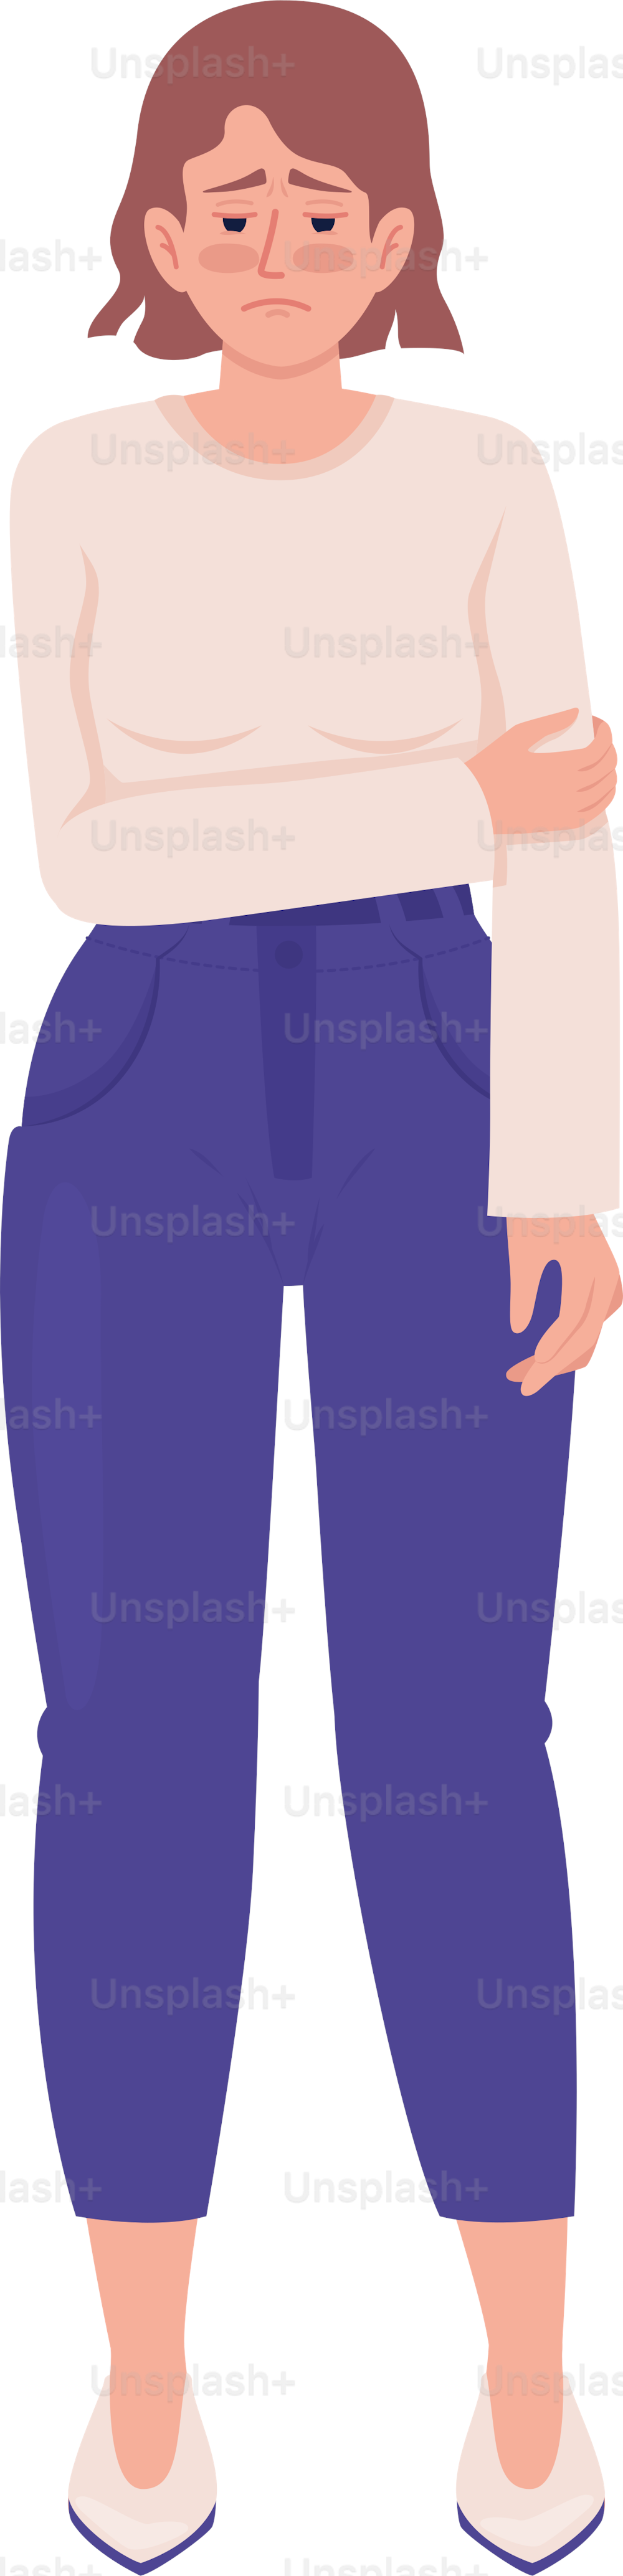 Woman suffering from depression semi flat color vector character. Editable figure. Full body person on white. Mental health simple cartoon style illustration for web graphic design and animation